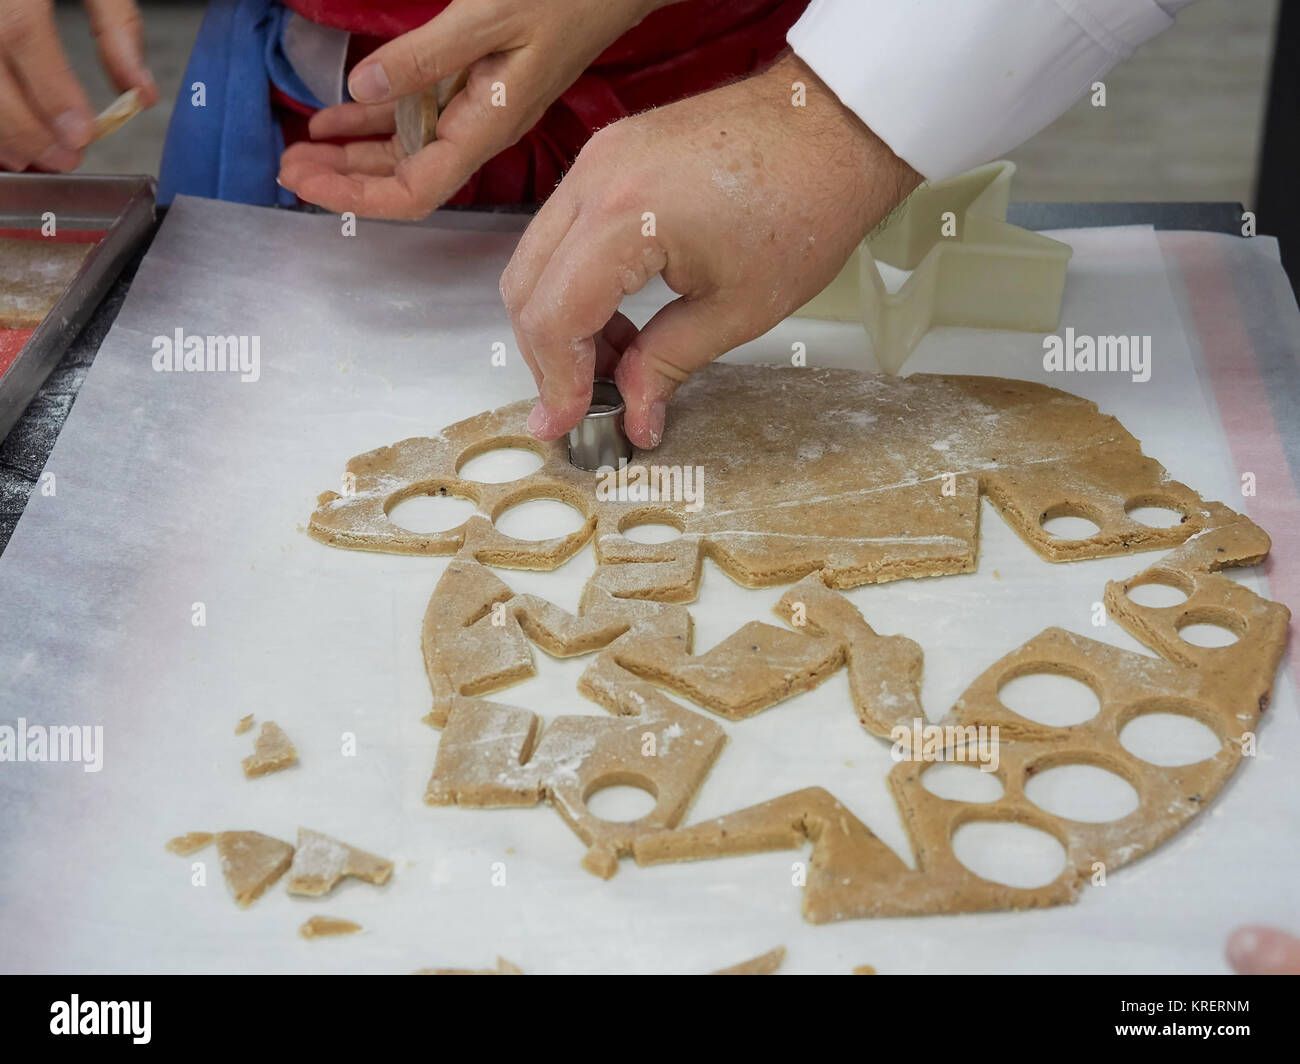 Making gingerbread cookies Stock Photo